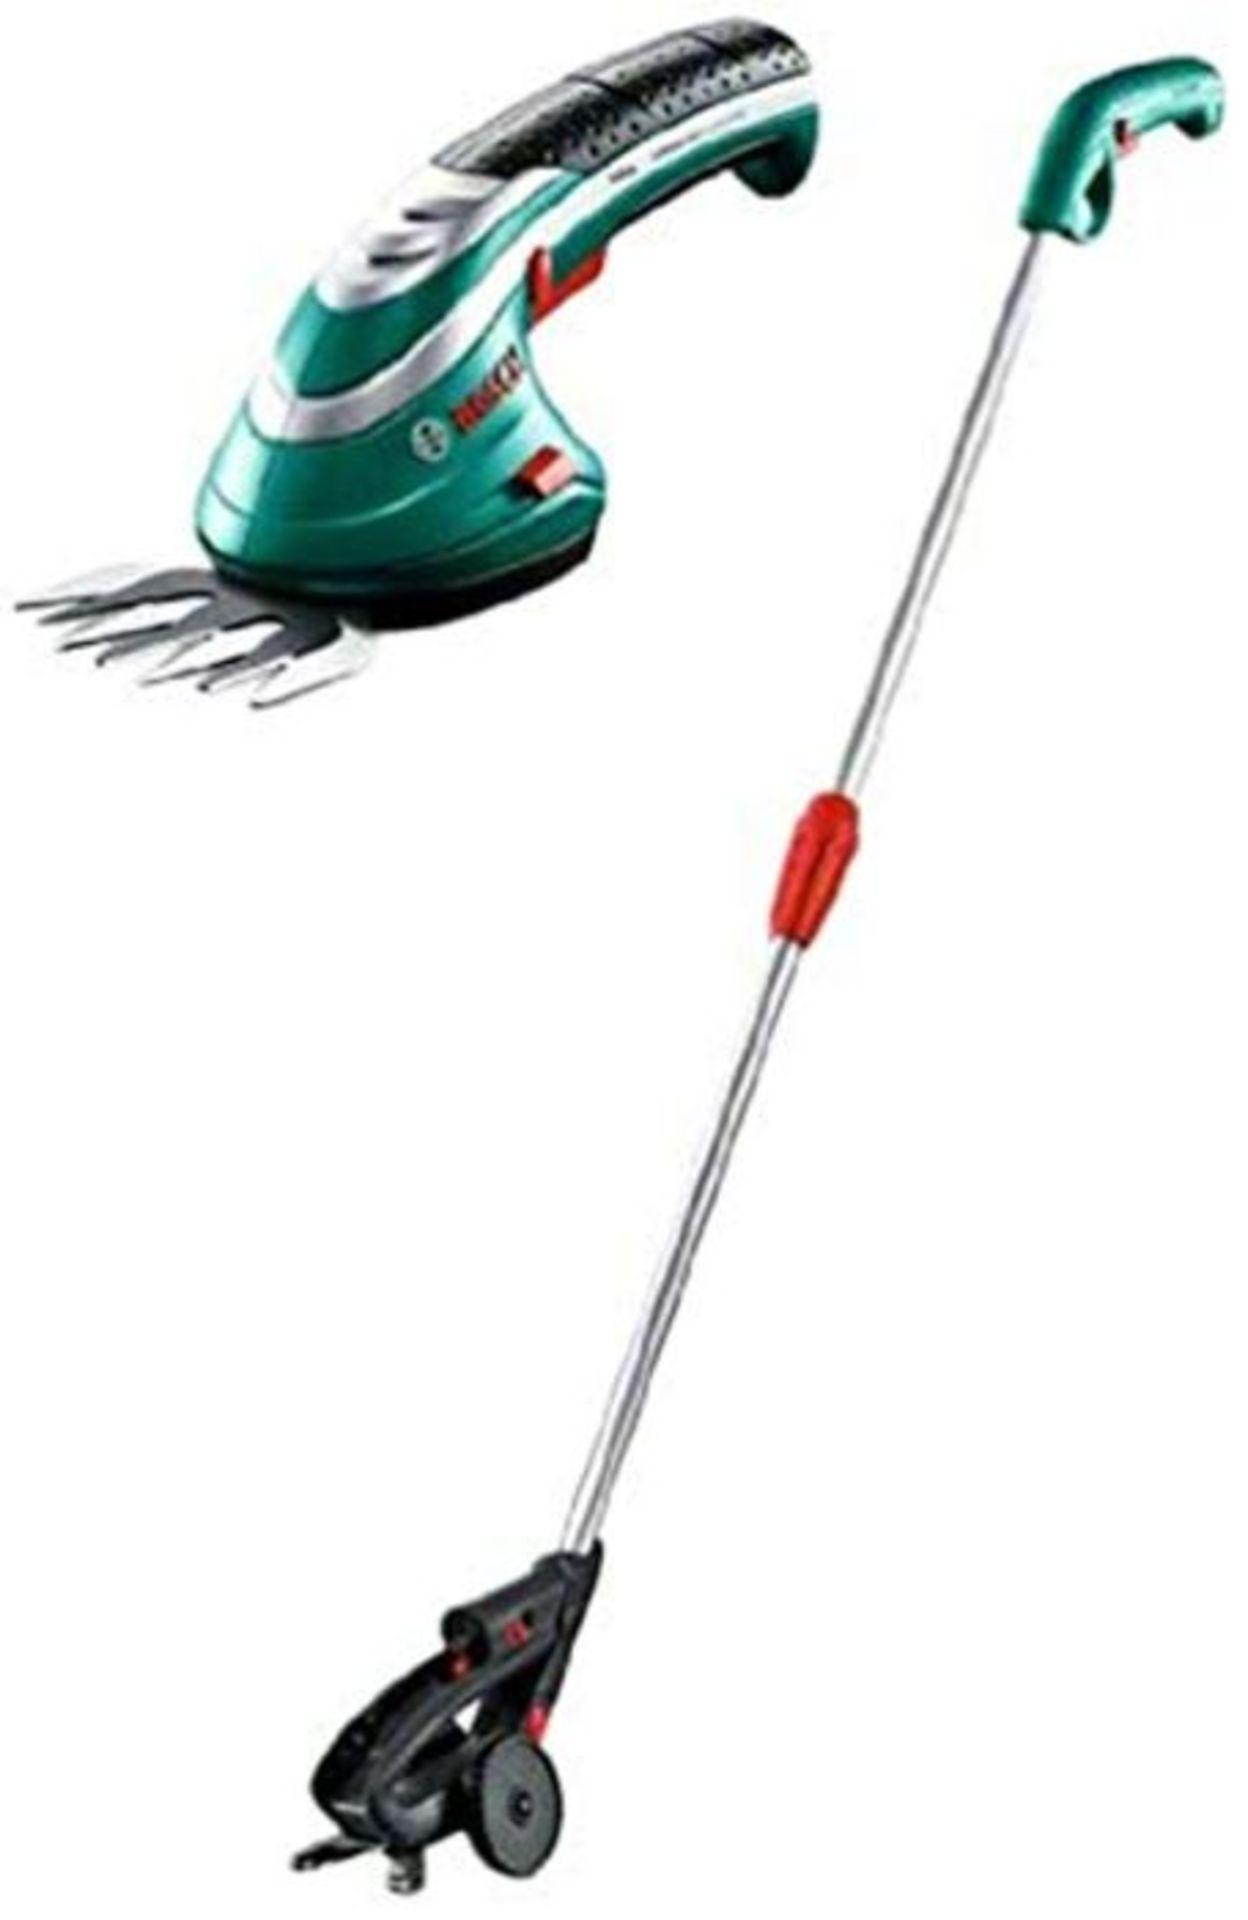 RRP £105.00 Bosch ISIO Battery hedge trimmer 1200g ISIO, Battery hedge trimmer, 8 cm, Black, Green